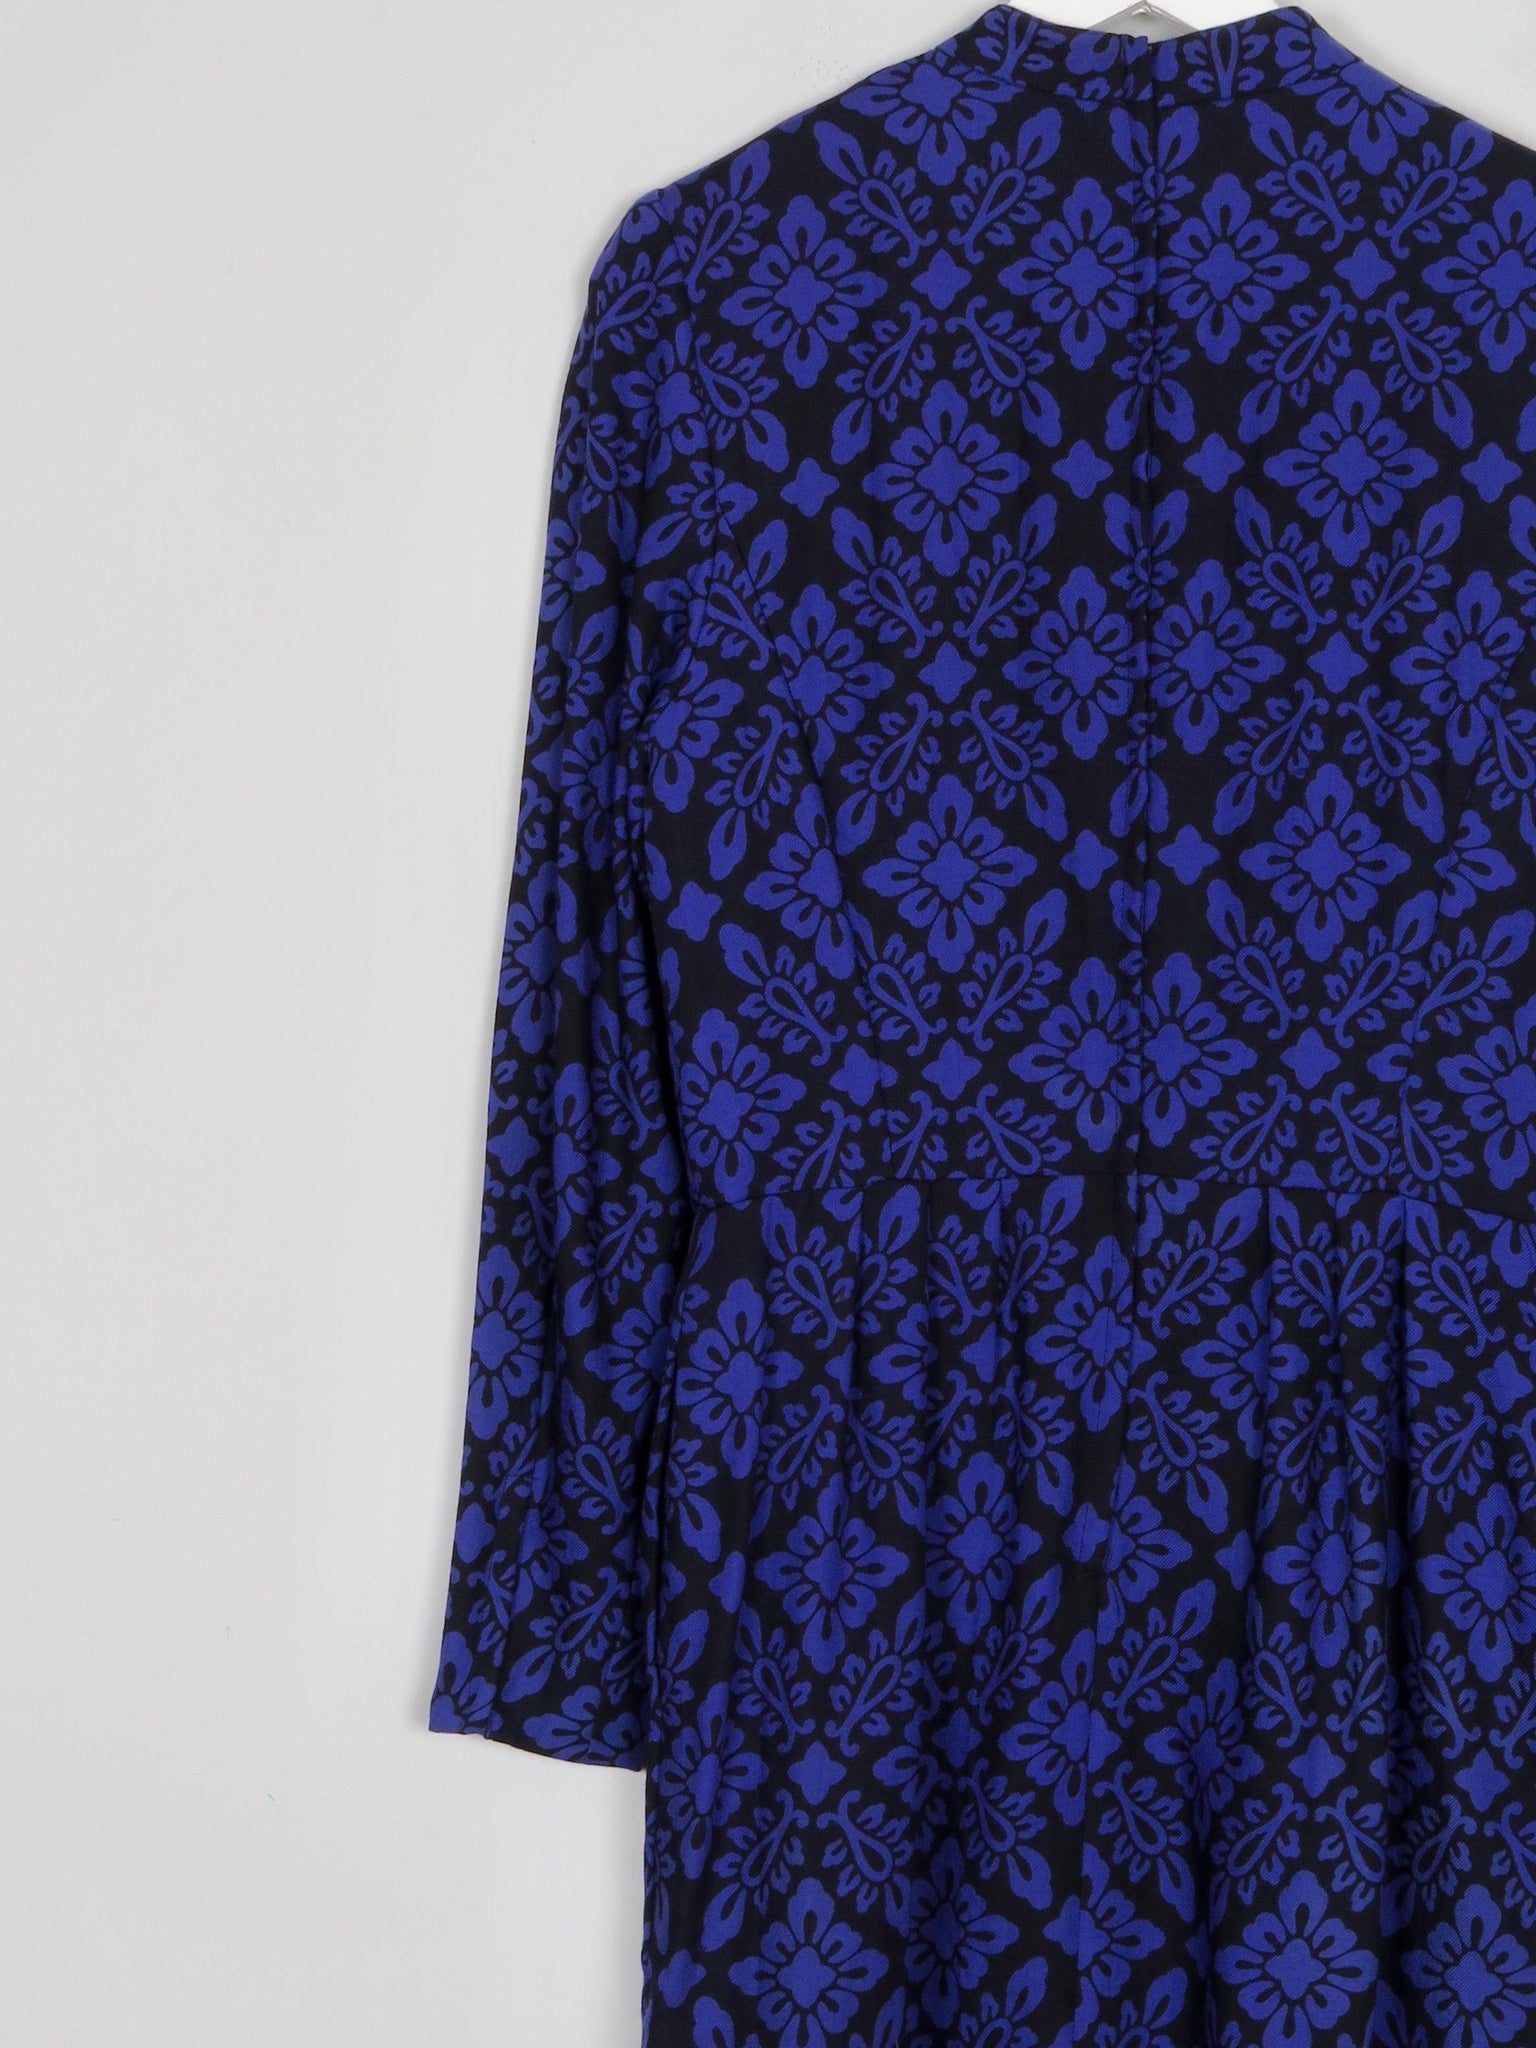 Guy Laroche Electric Blue Printed Dress With Pockets 8/10 36/38" Bust 28" Waist - The Harlequin